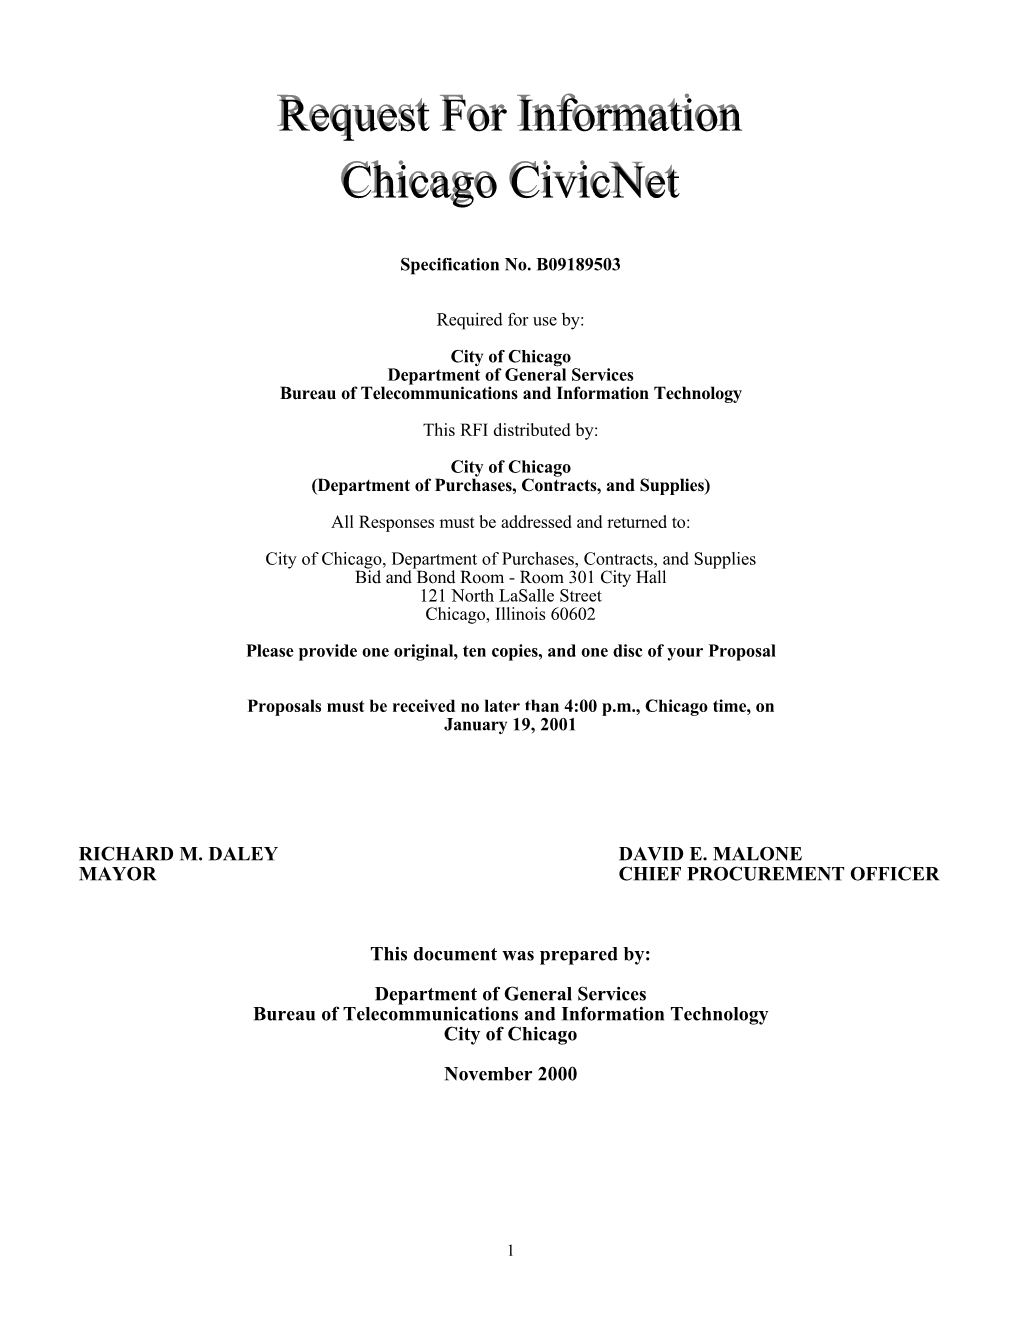 Request for Information Chicago Civicnet